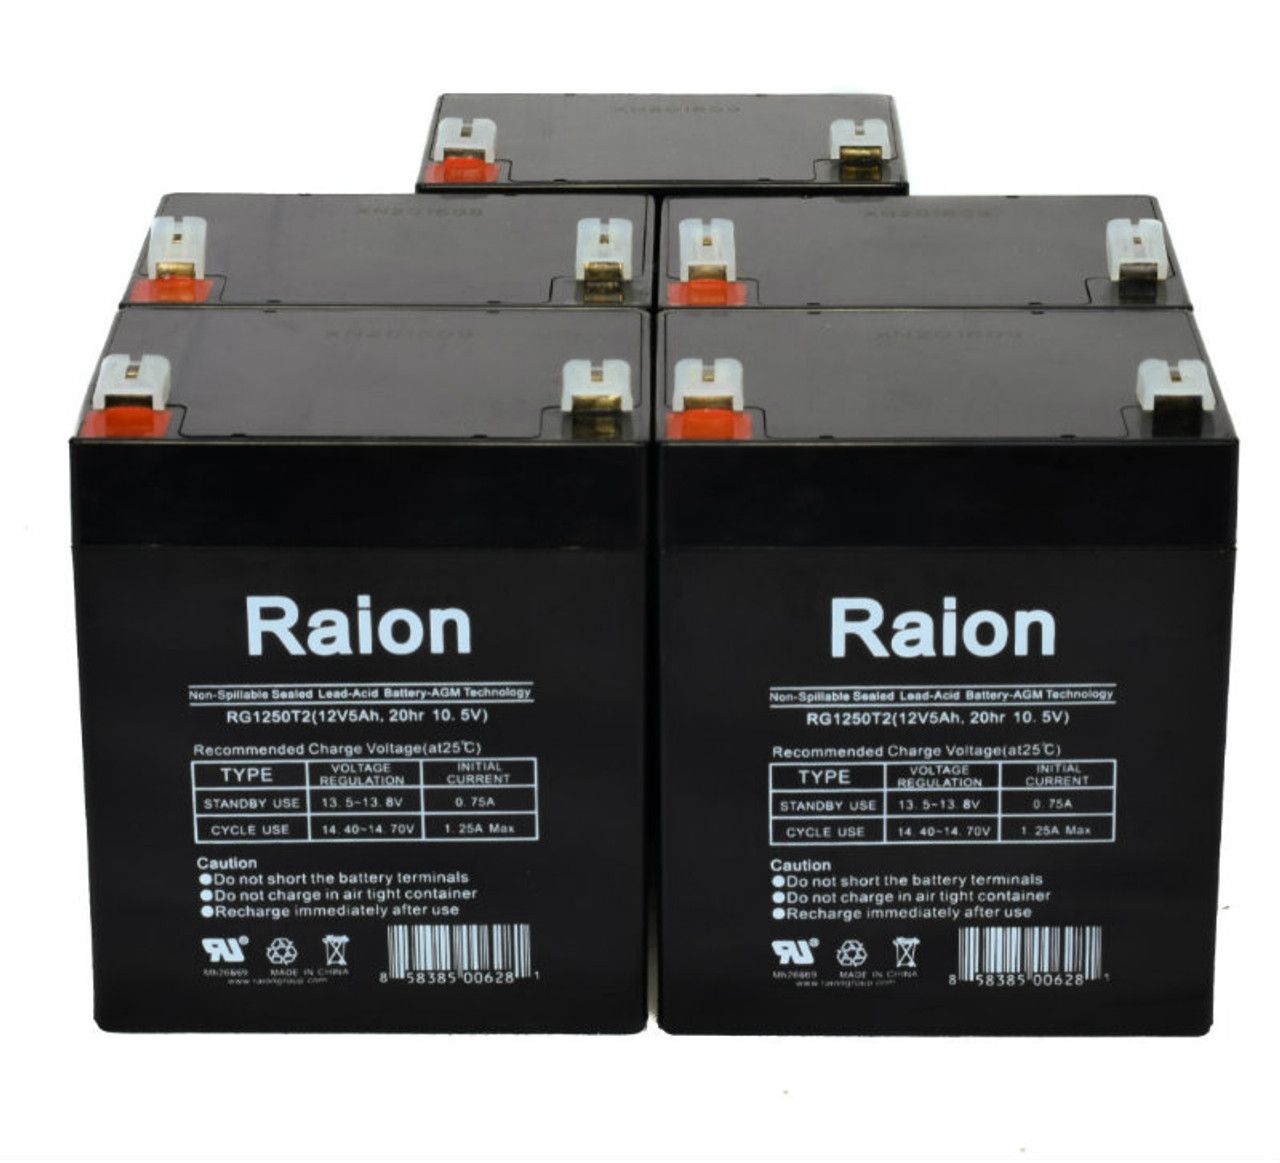 Raion Power 12V 5Ah RG1250T2 Replacement Lead Acid Battery for Narada 6-FM-4.5 - 5 Pack